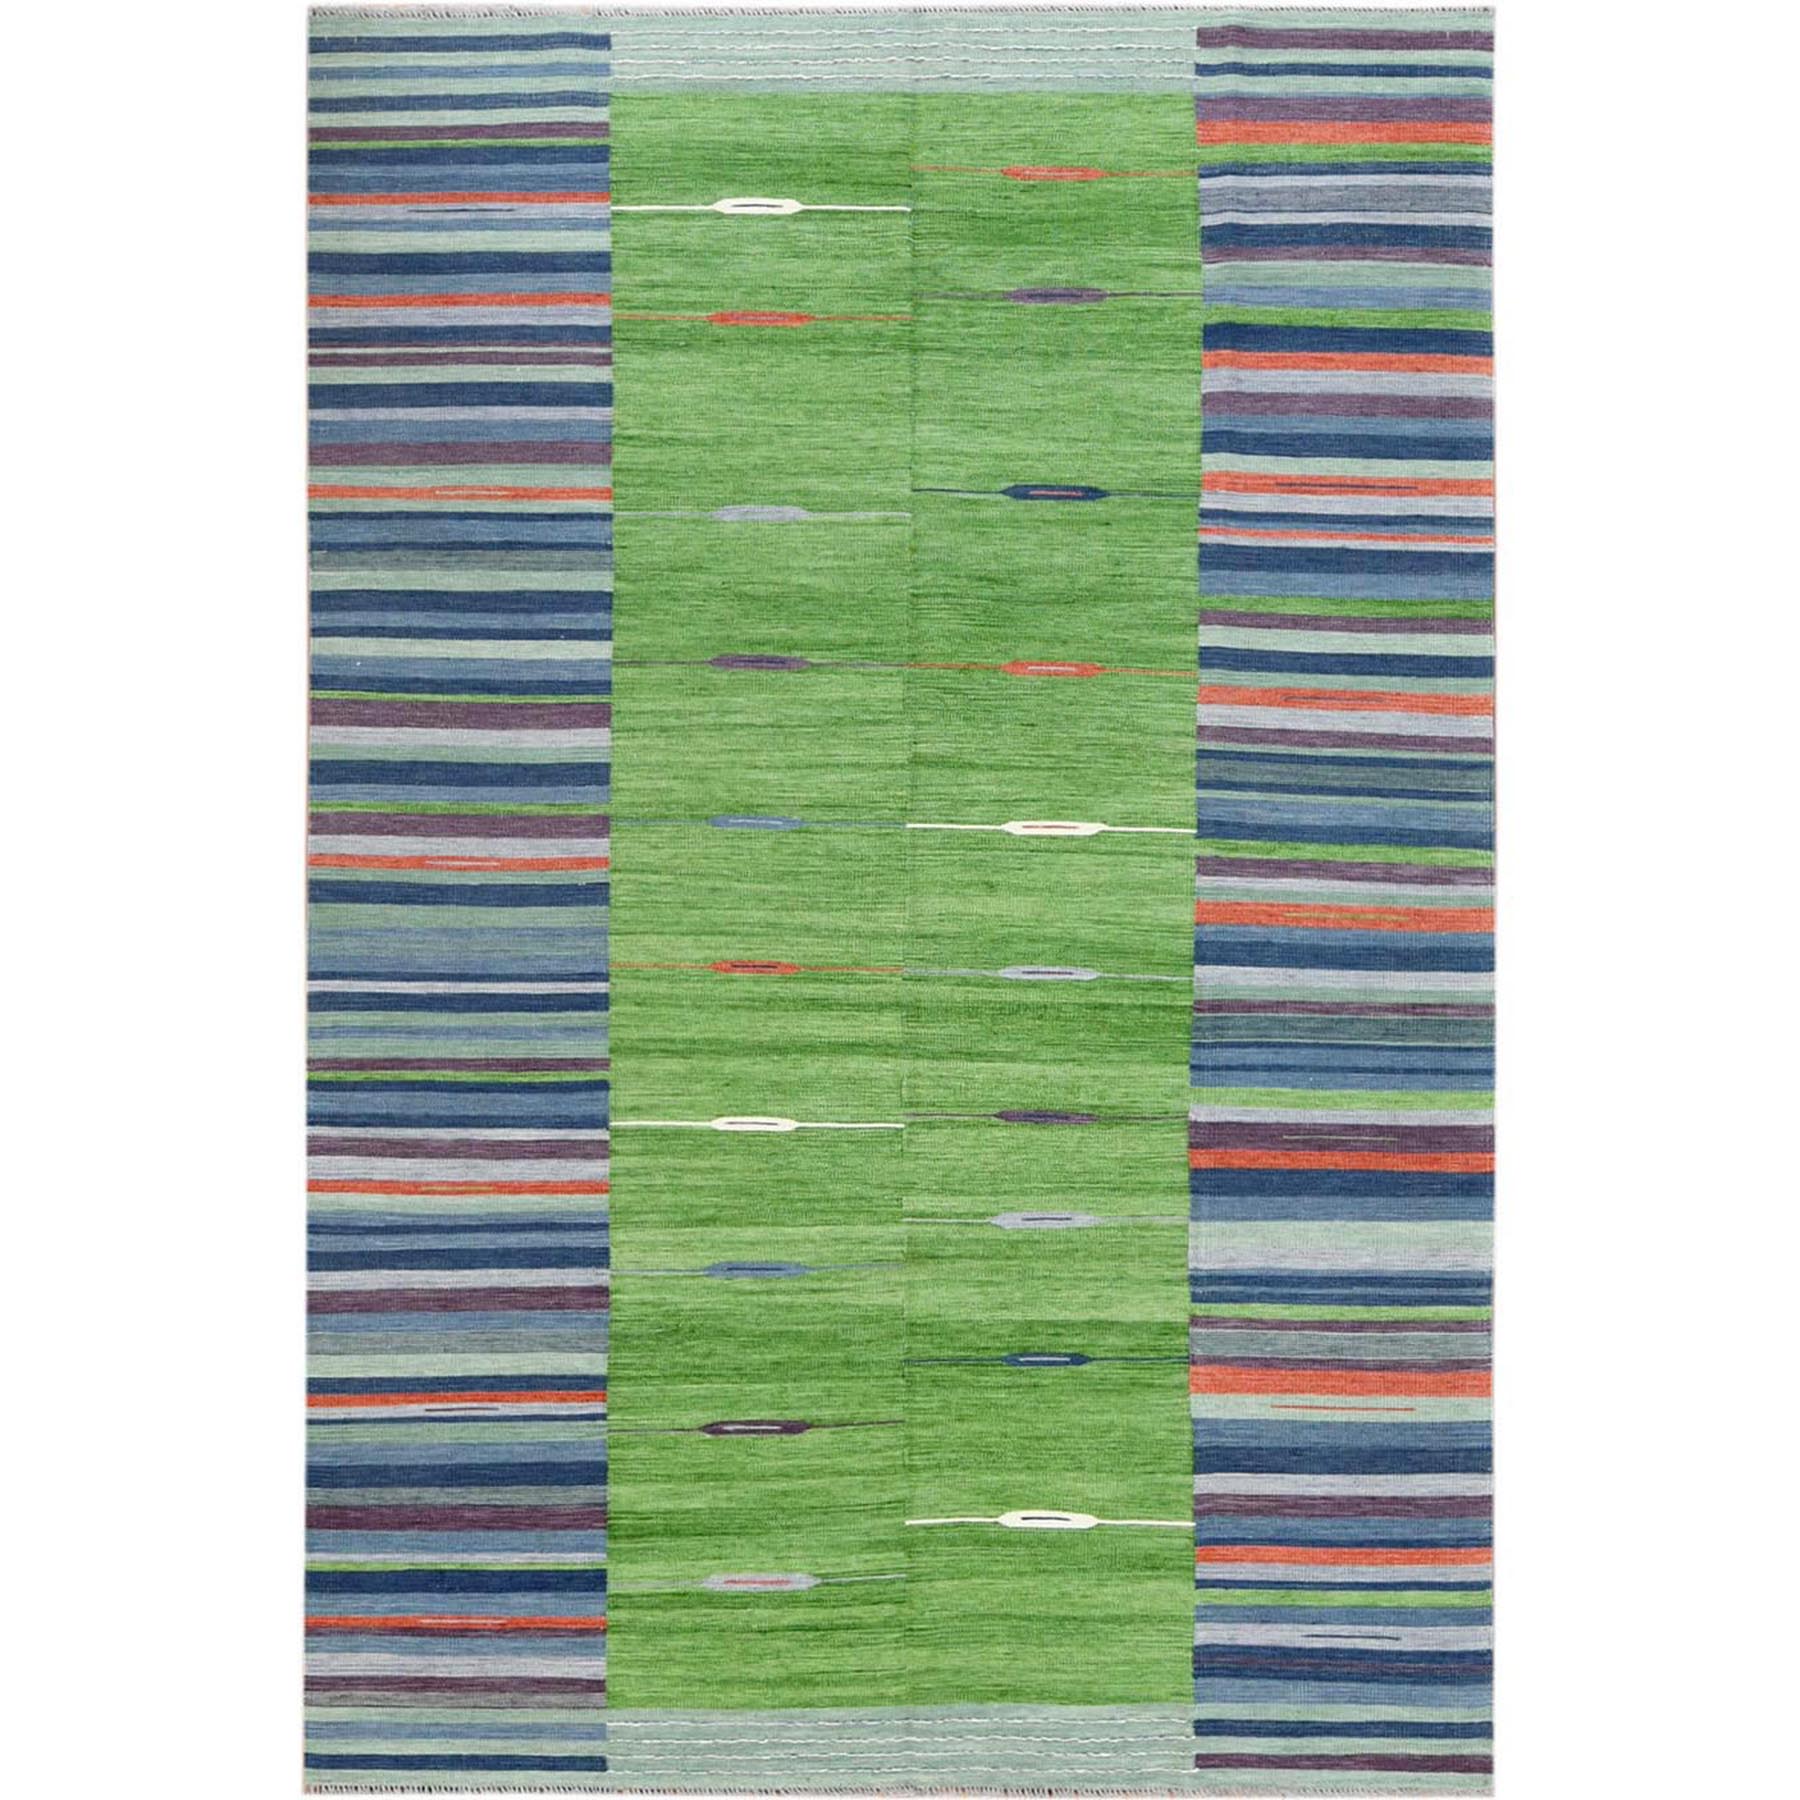 Modern & Contemporary Wool Hand-Woven Area Rug 6'2